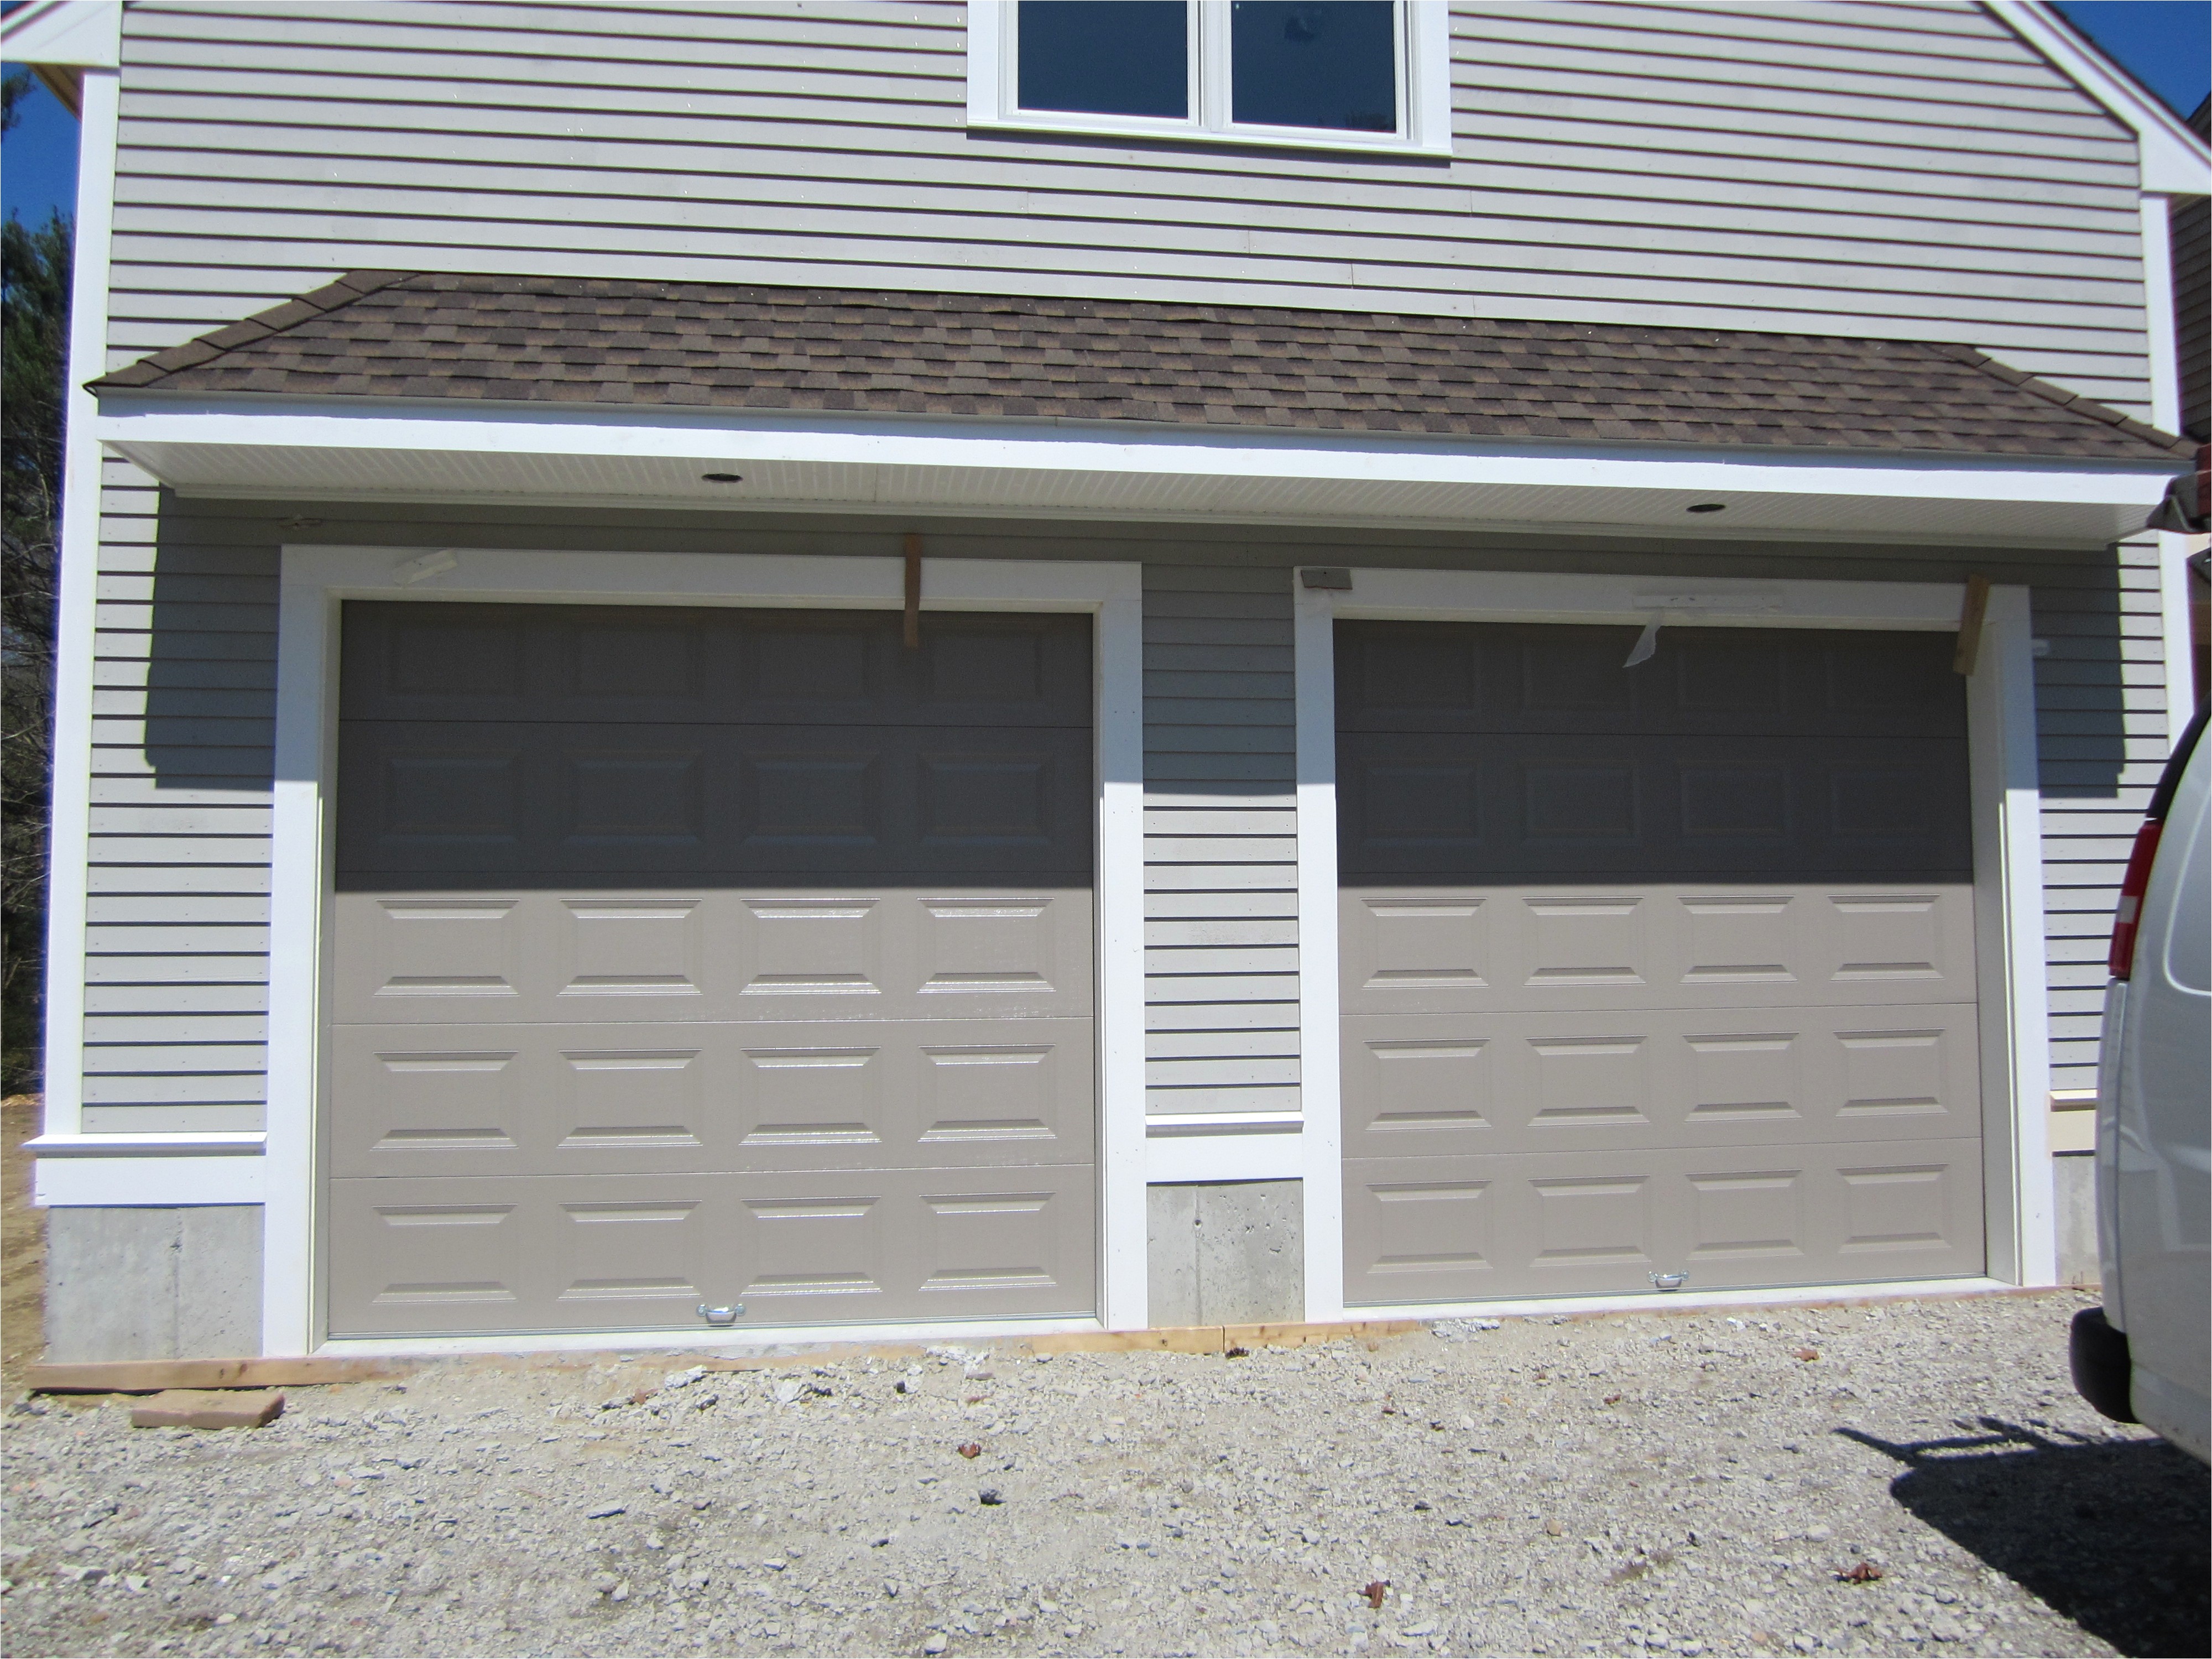 Simple Garage Door Prices for Small Space